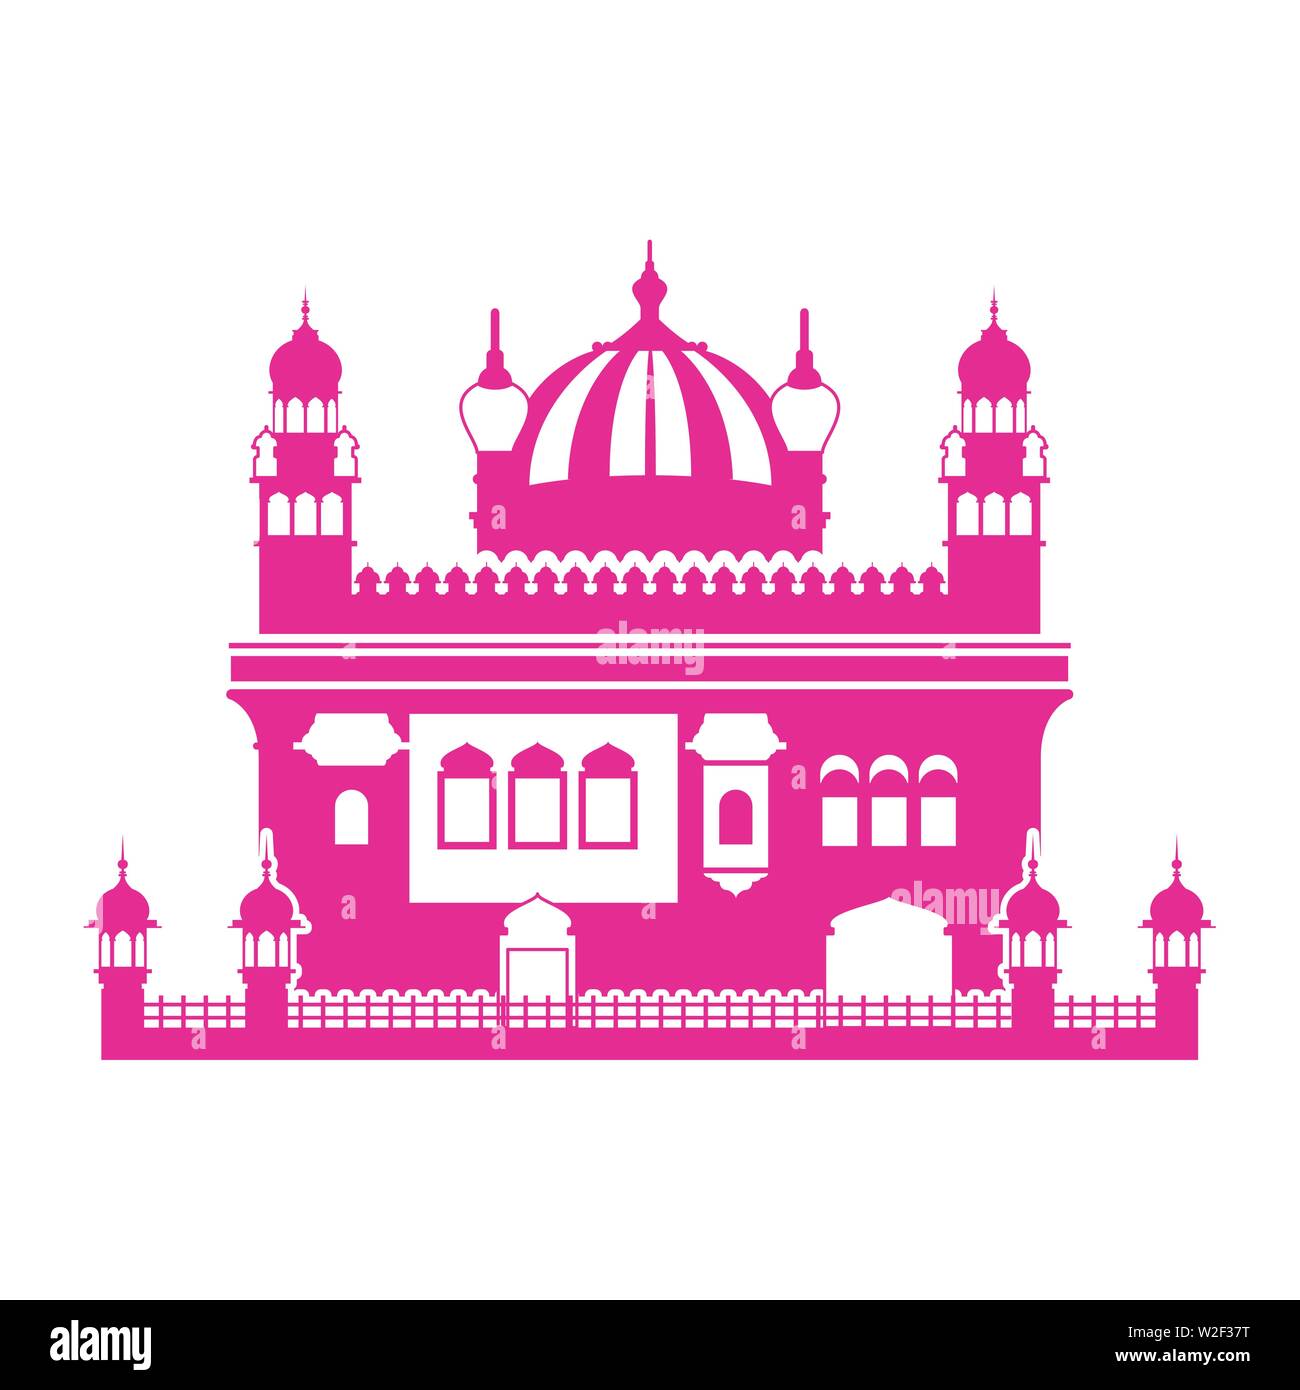 edification of amritsar golden temple and indian independence day Stock Vector